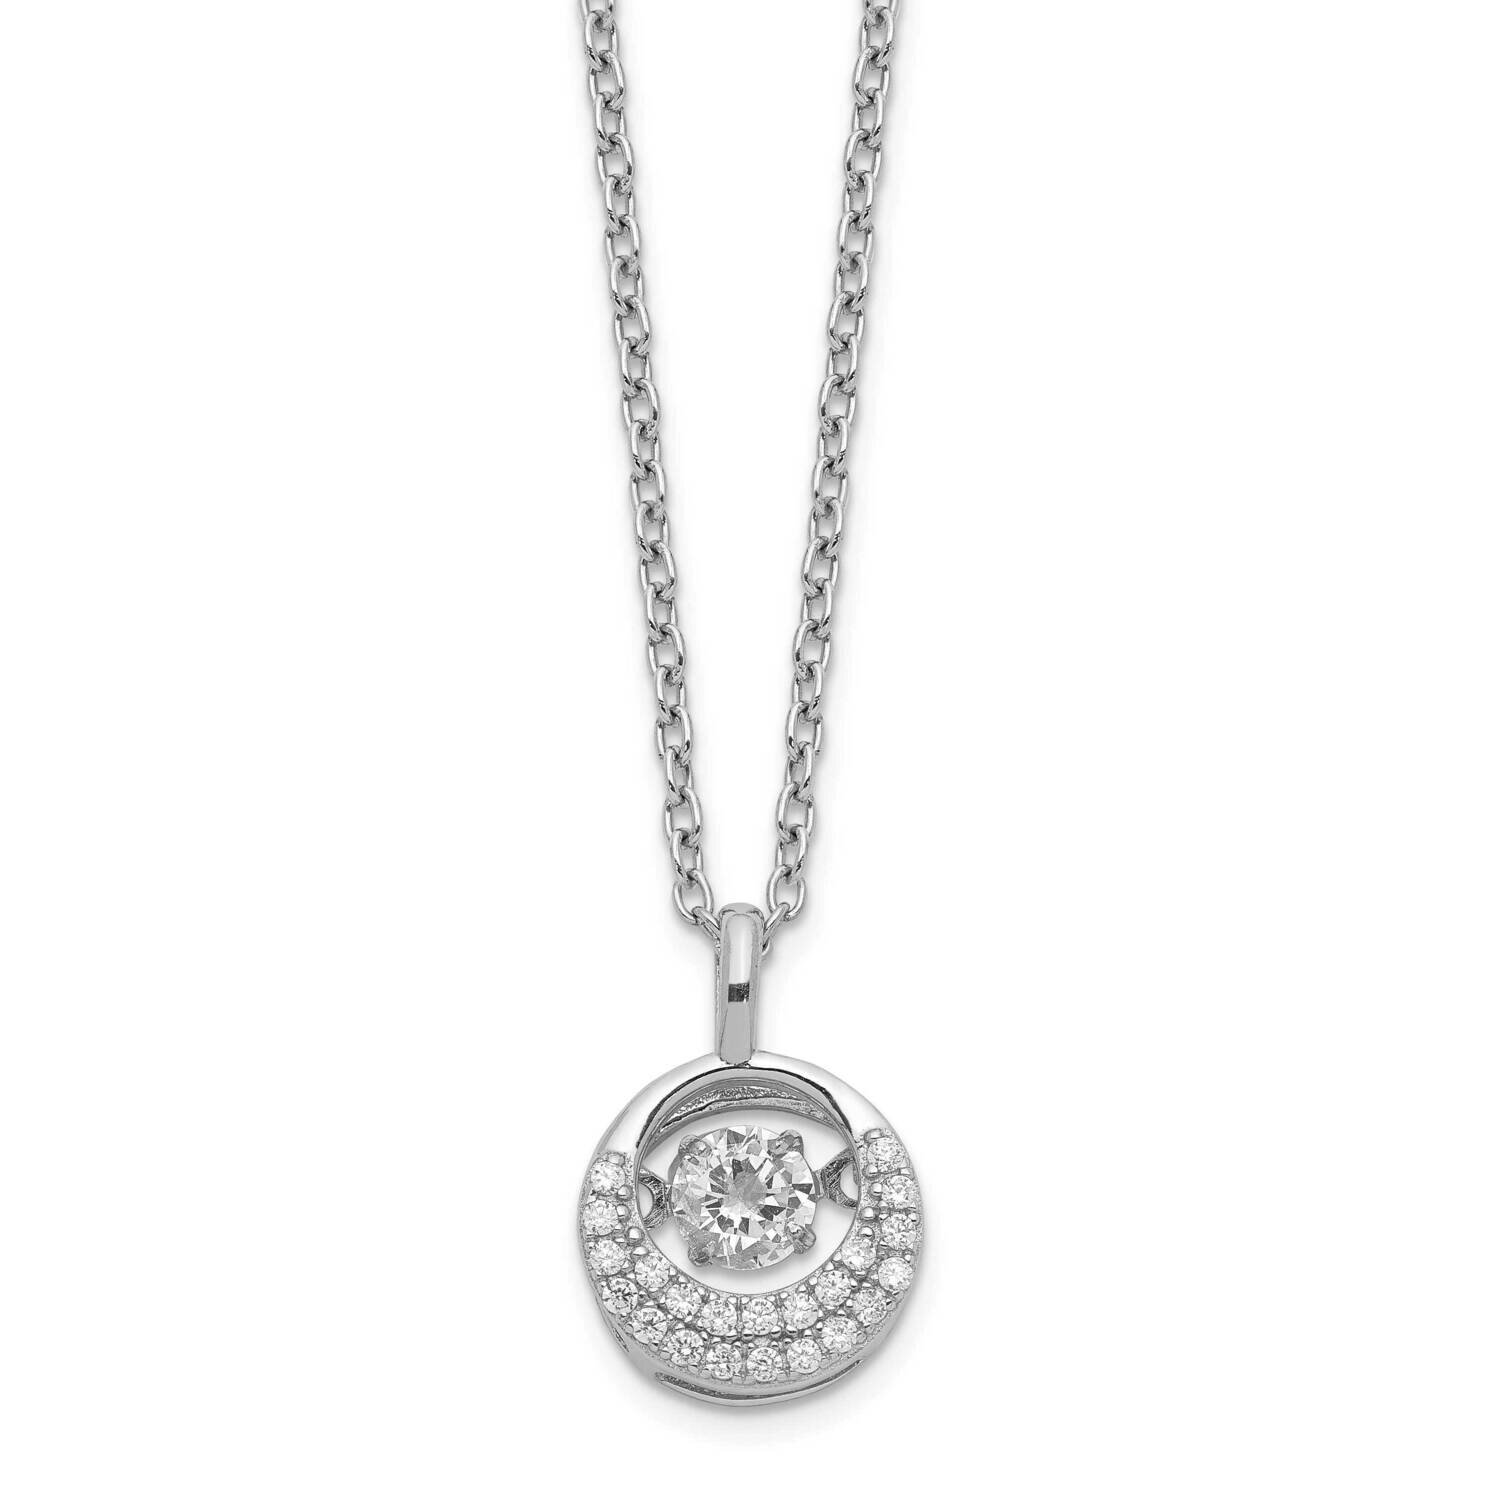 Cheryl M Vibrant Cz Circle 18 Inch Necklace Sterling Silver Rhodium-plated QCM1432-18